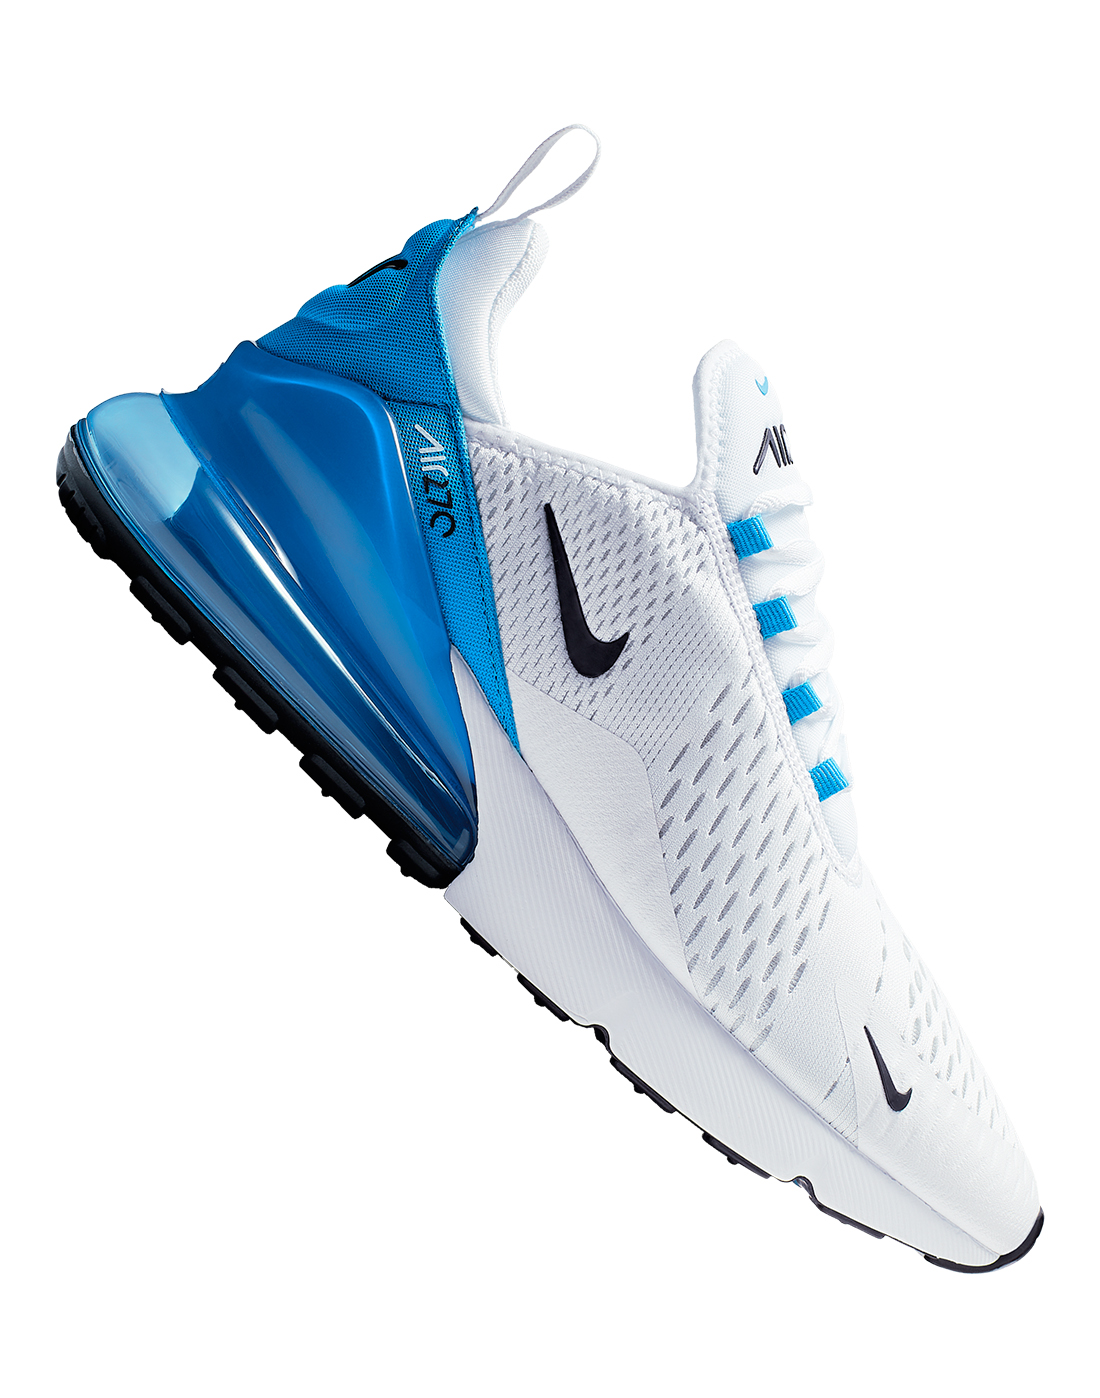 air max 270s blue and white